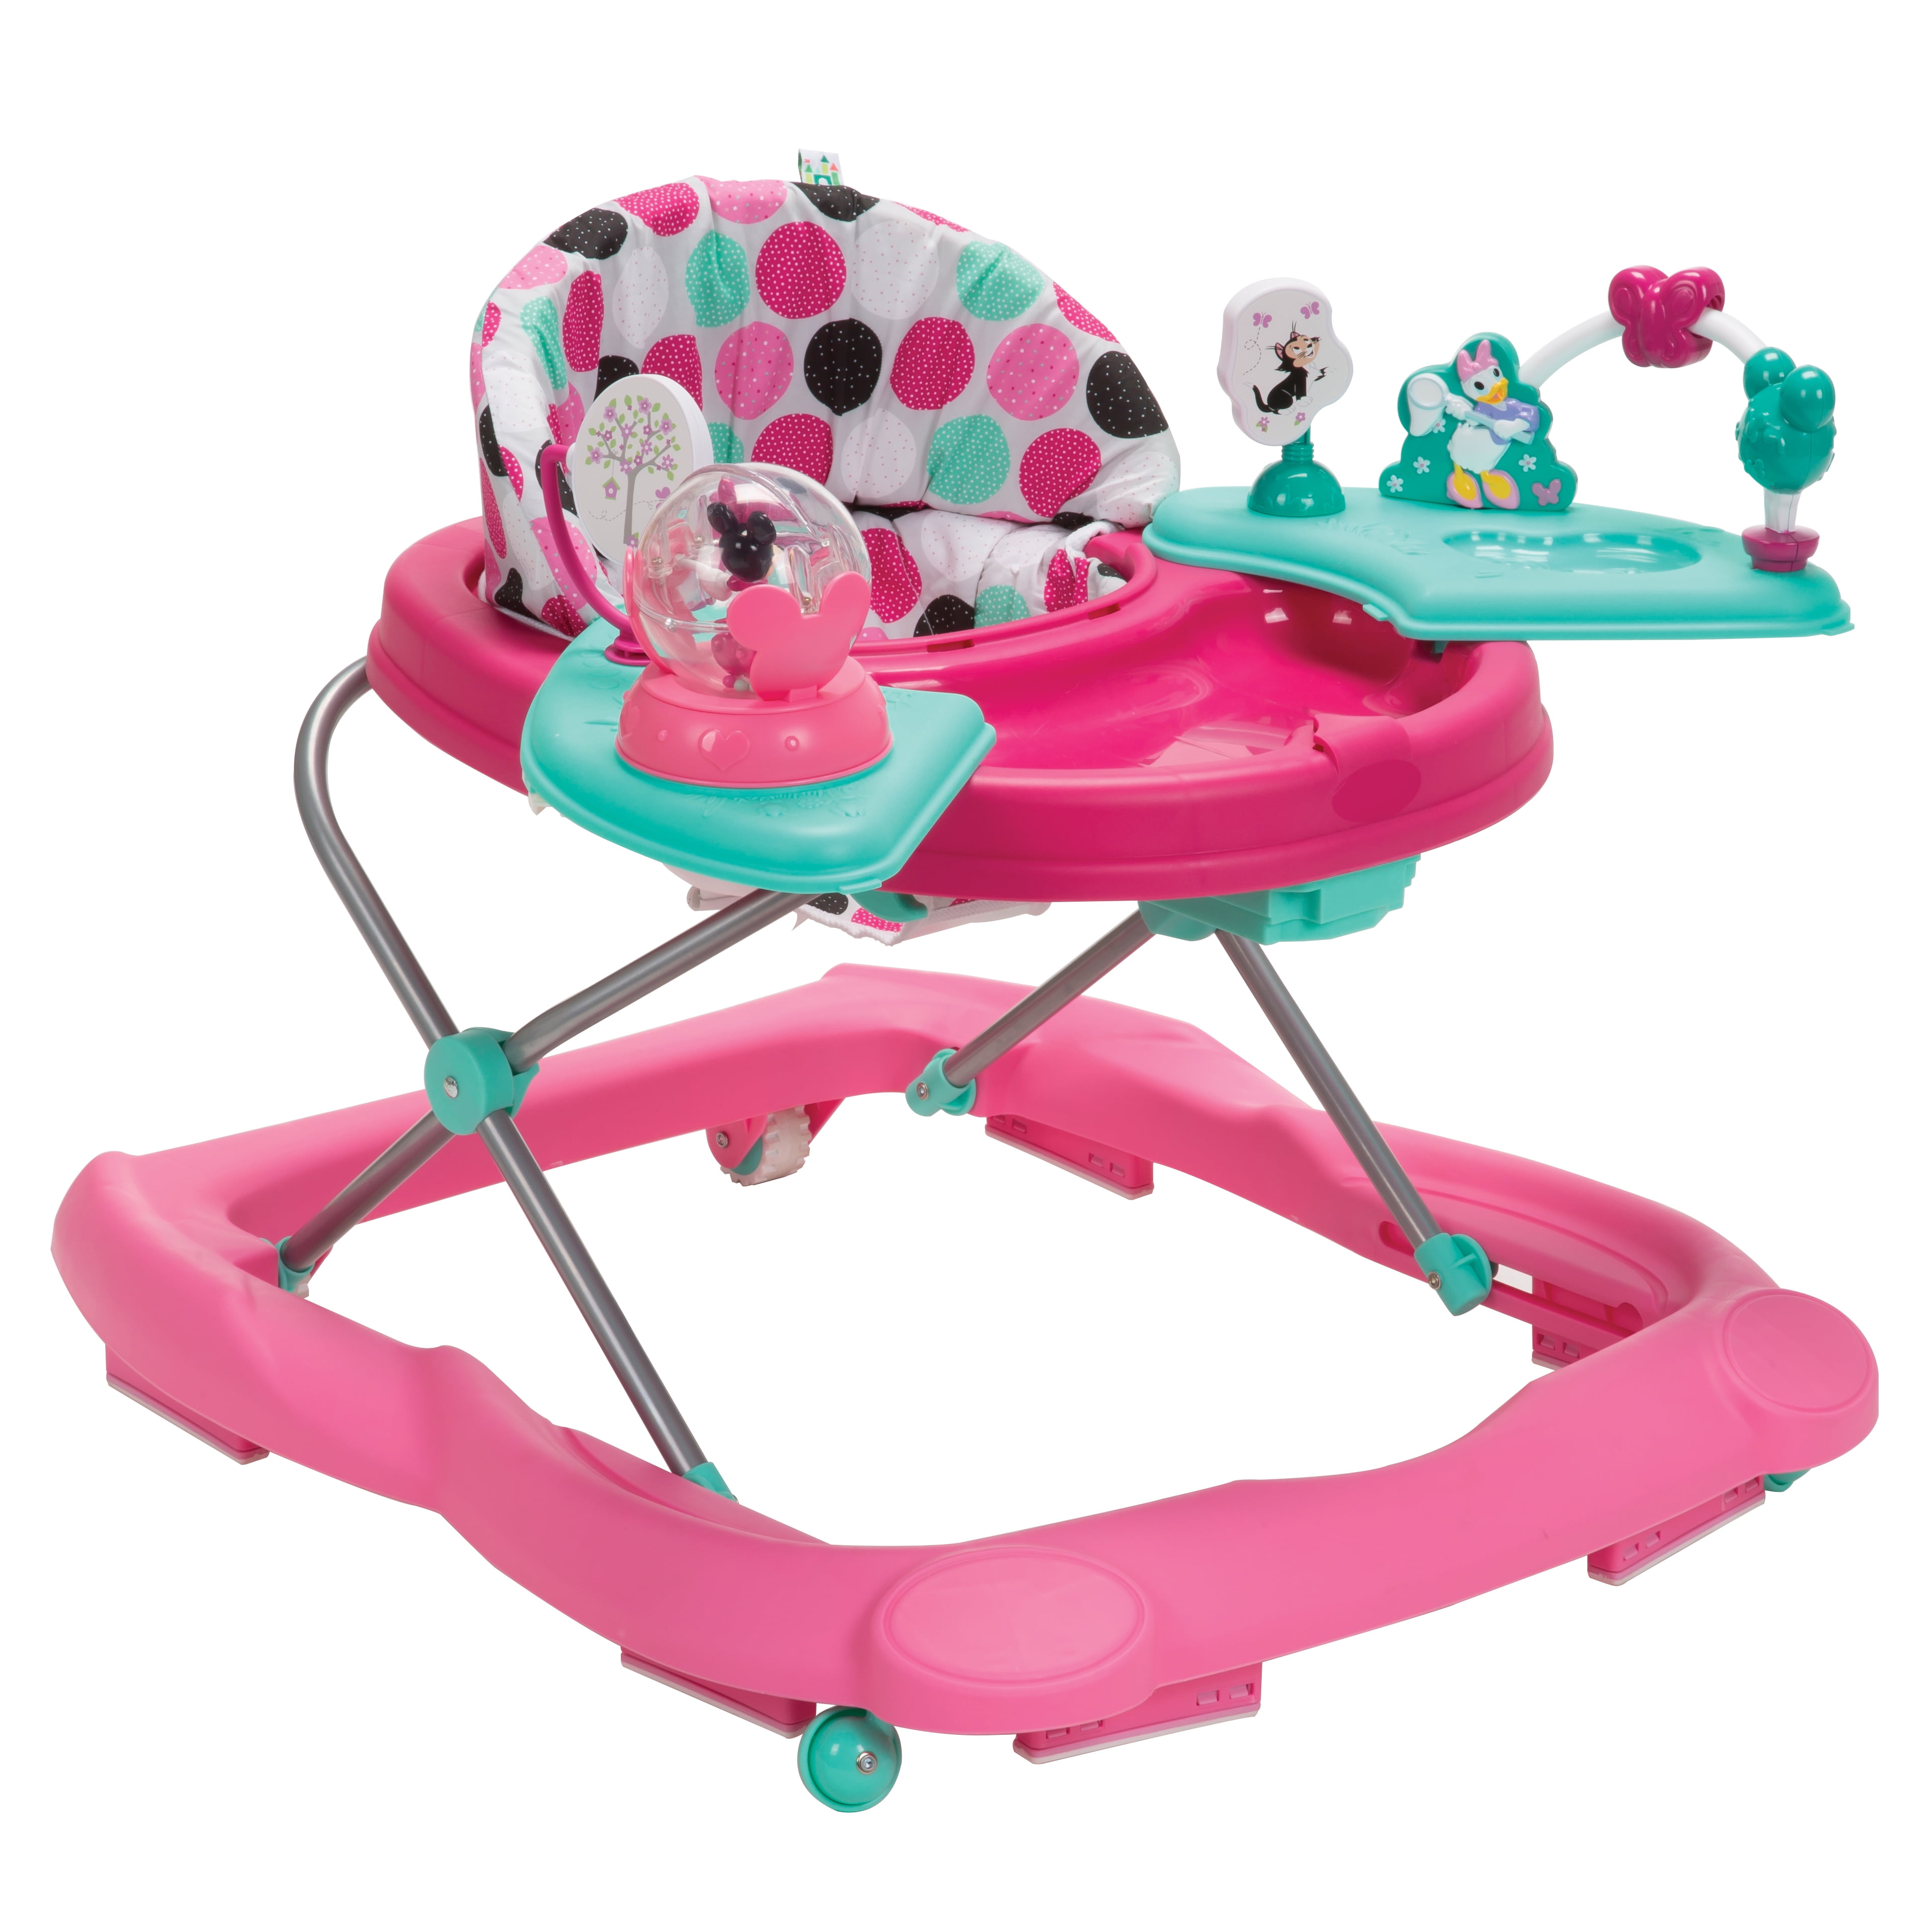 Baby Walker With Music And Lights : 5 in 1 Baby Walker Adjustable Height with Light & Music ... : With toys, music, and lights, it ensures engaging and interactive activities.